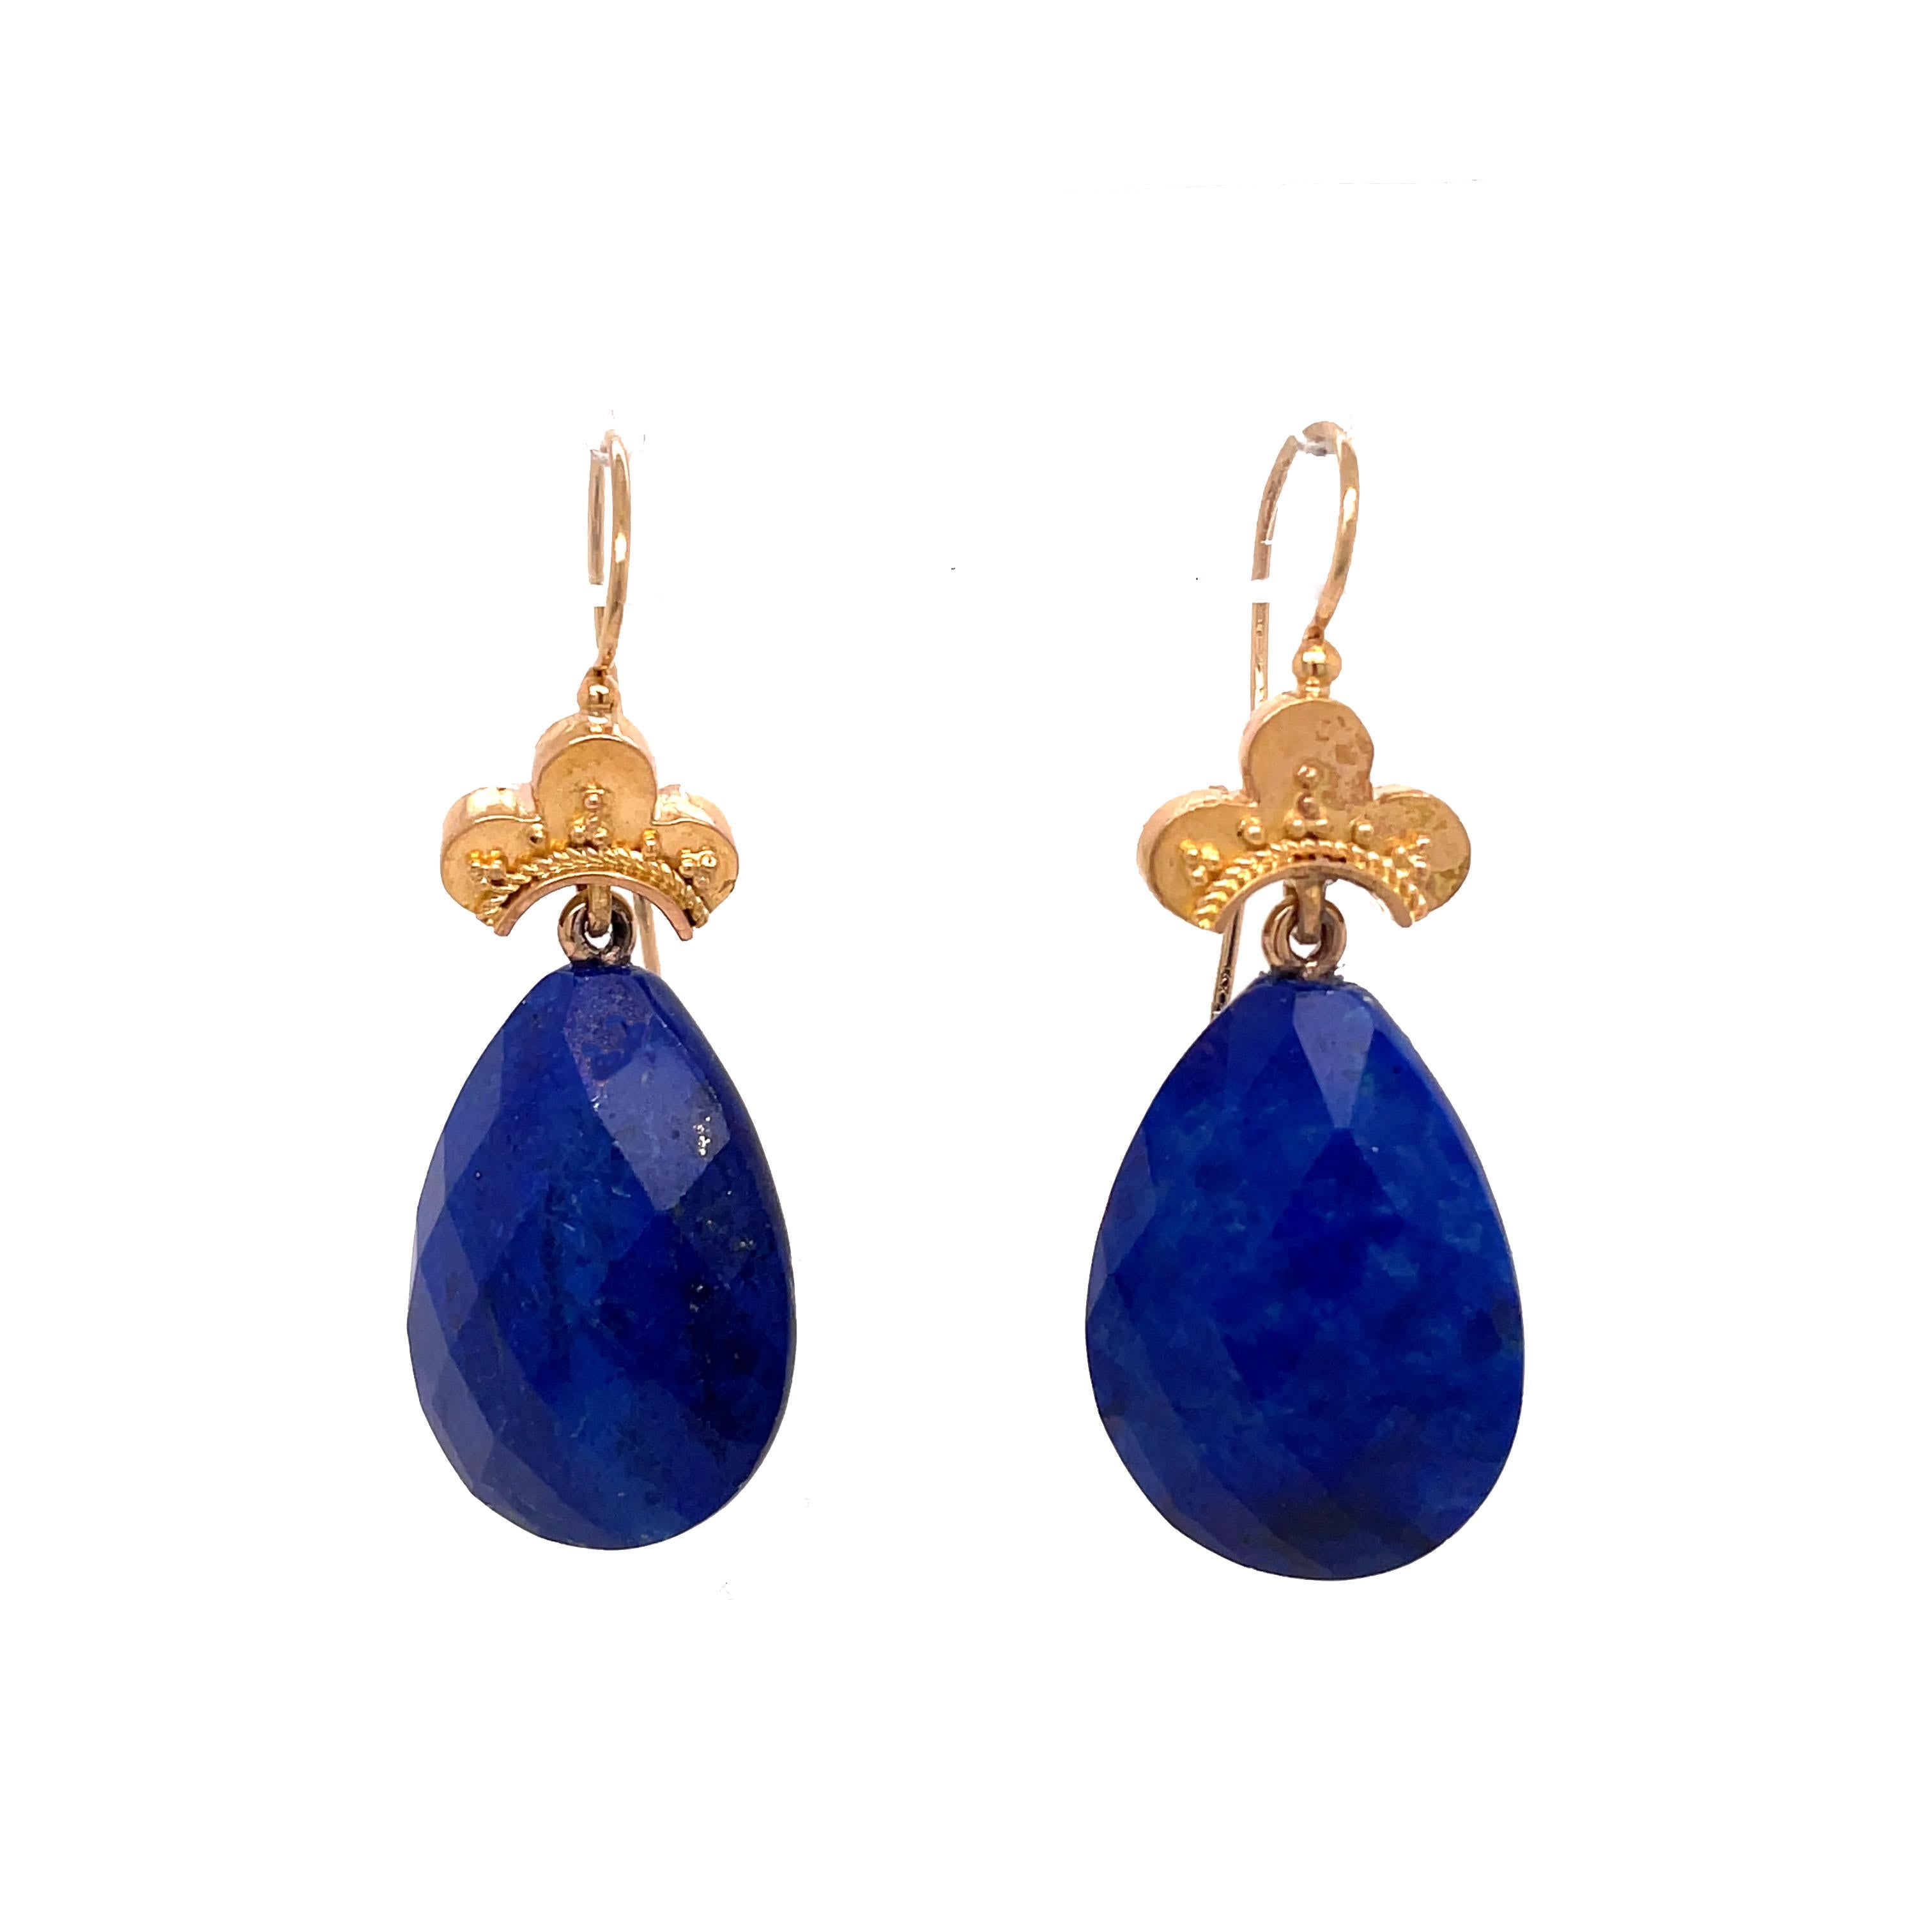 1880, Etruscan Lapis Lazuli 18k Yellow Gold Drop Earrings In Good Condition For Sale In Lexington, KY